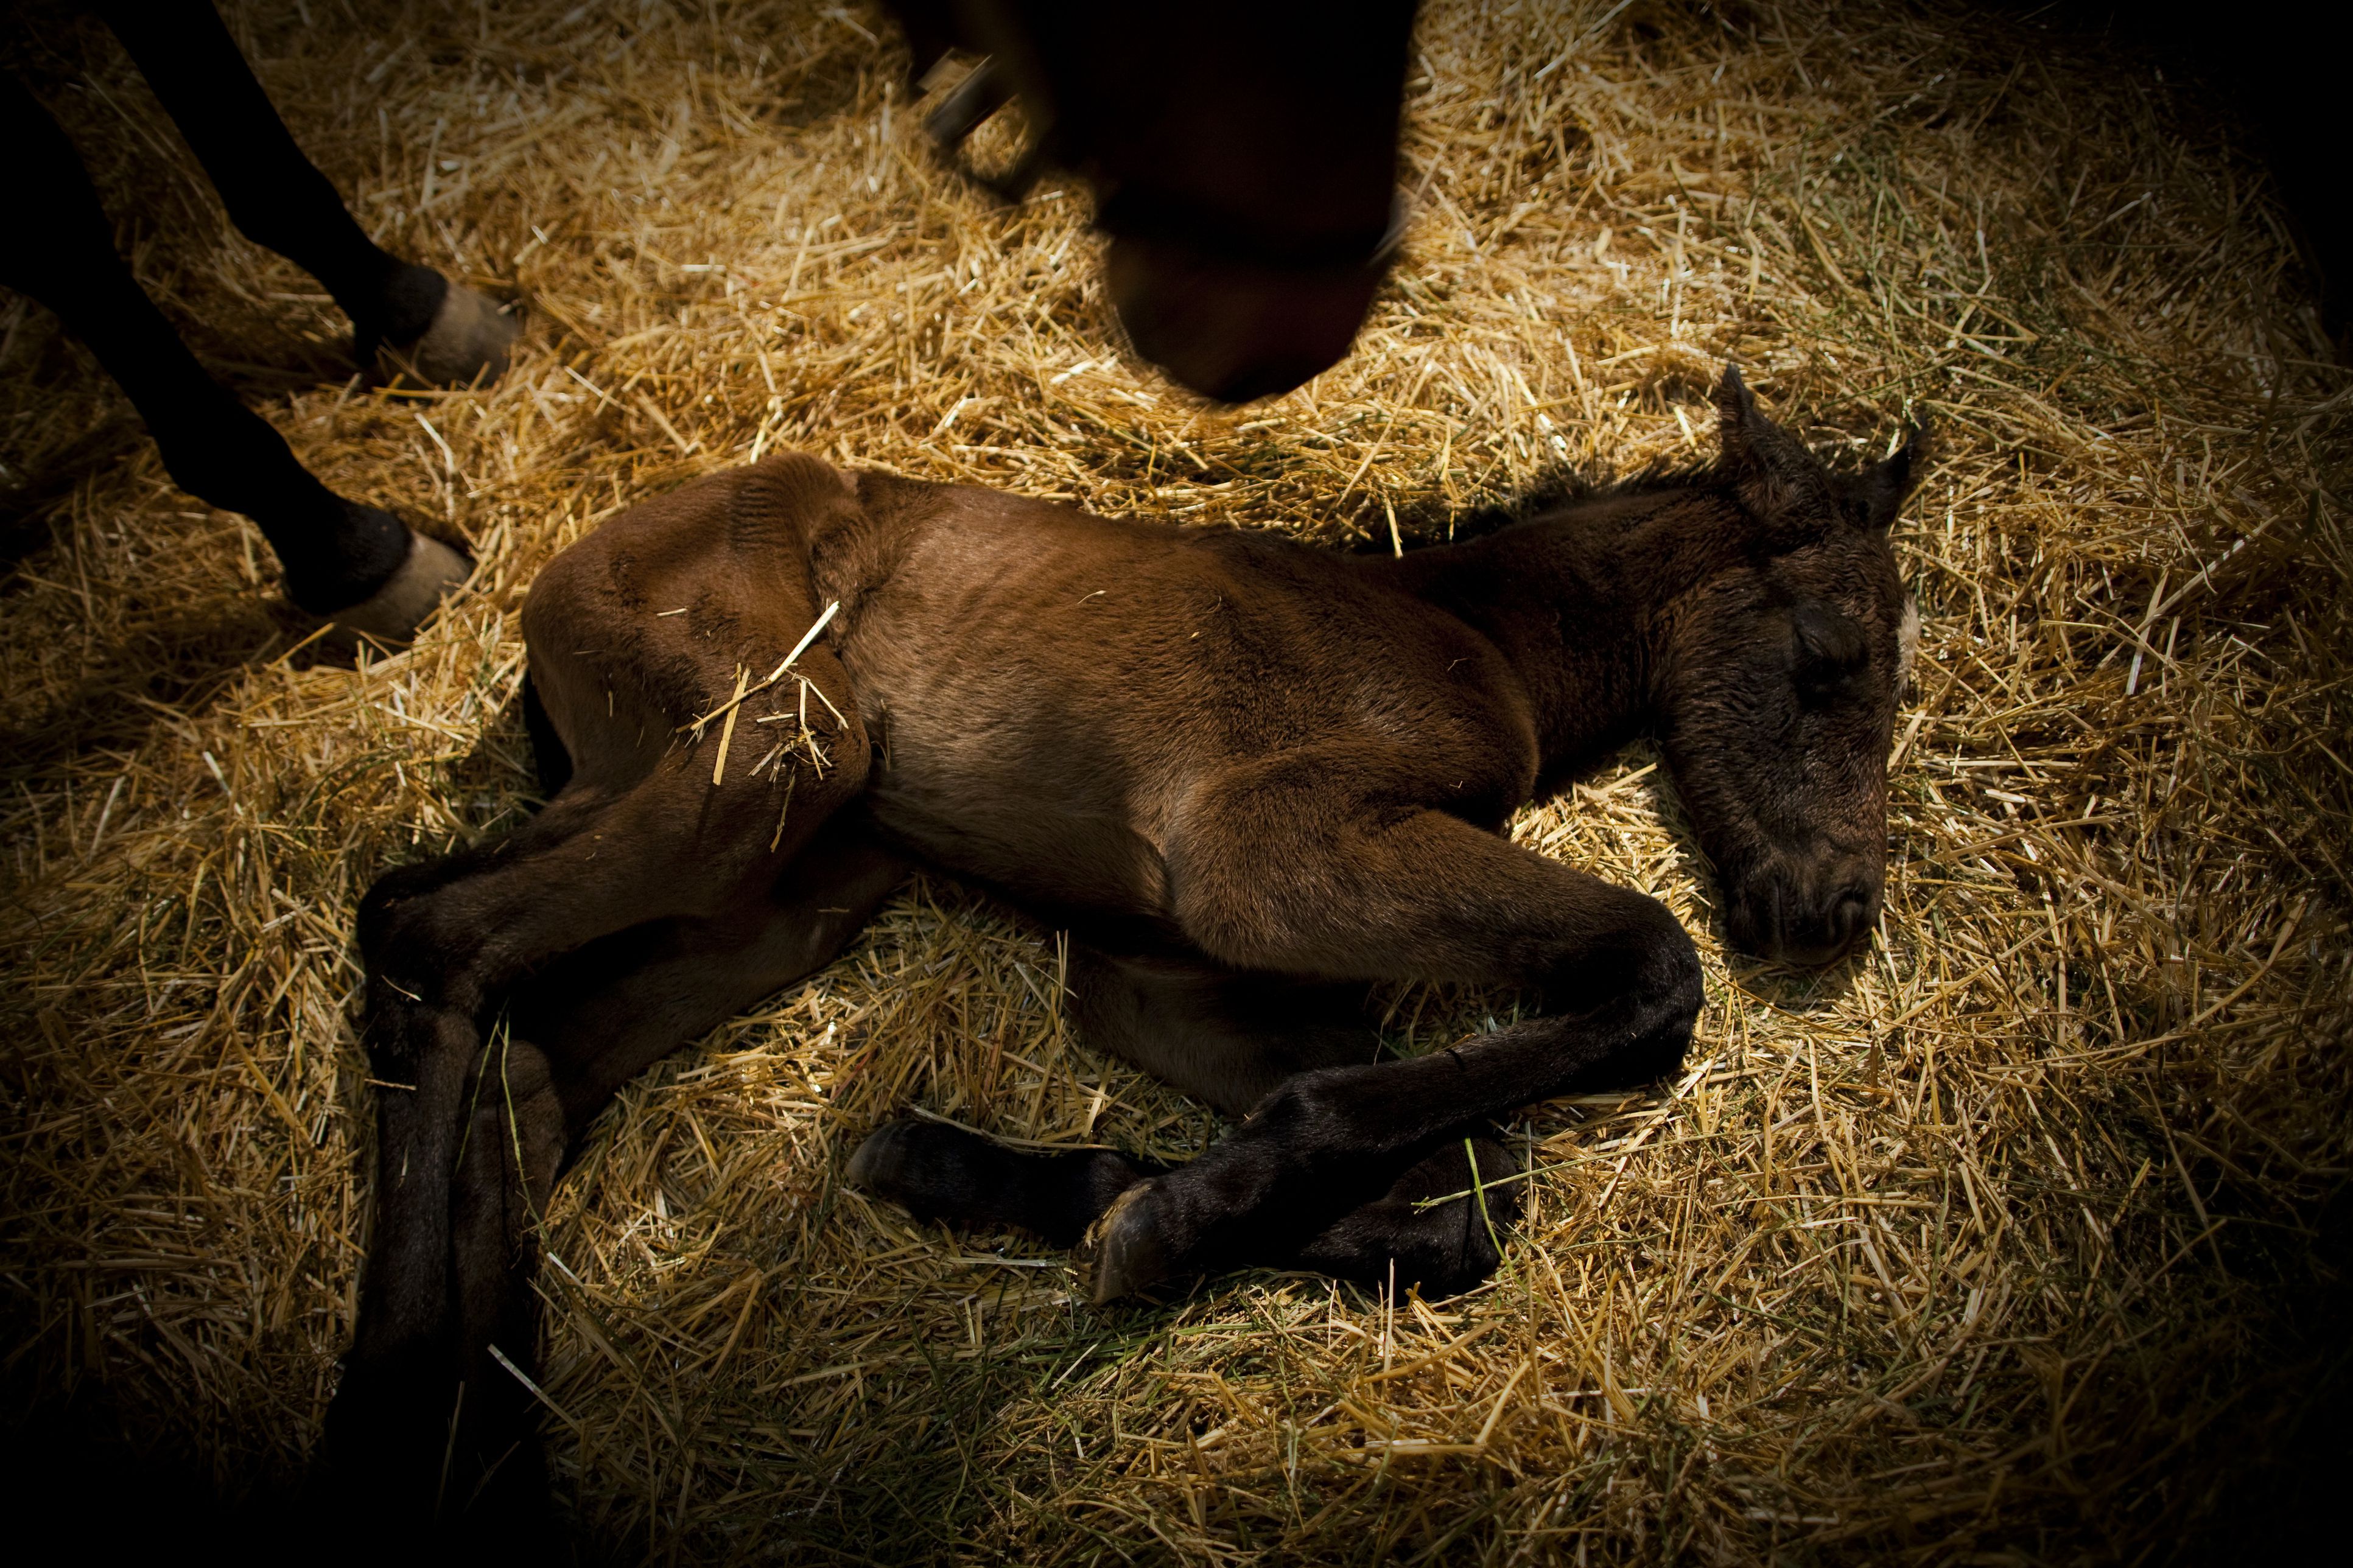 A newborn foal rests as mother tends to it